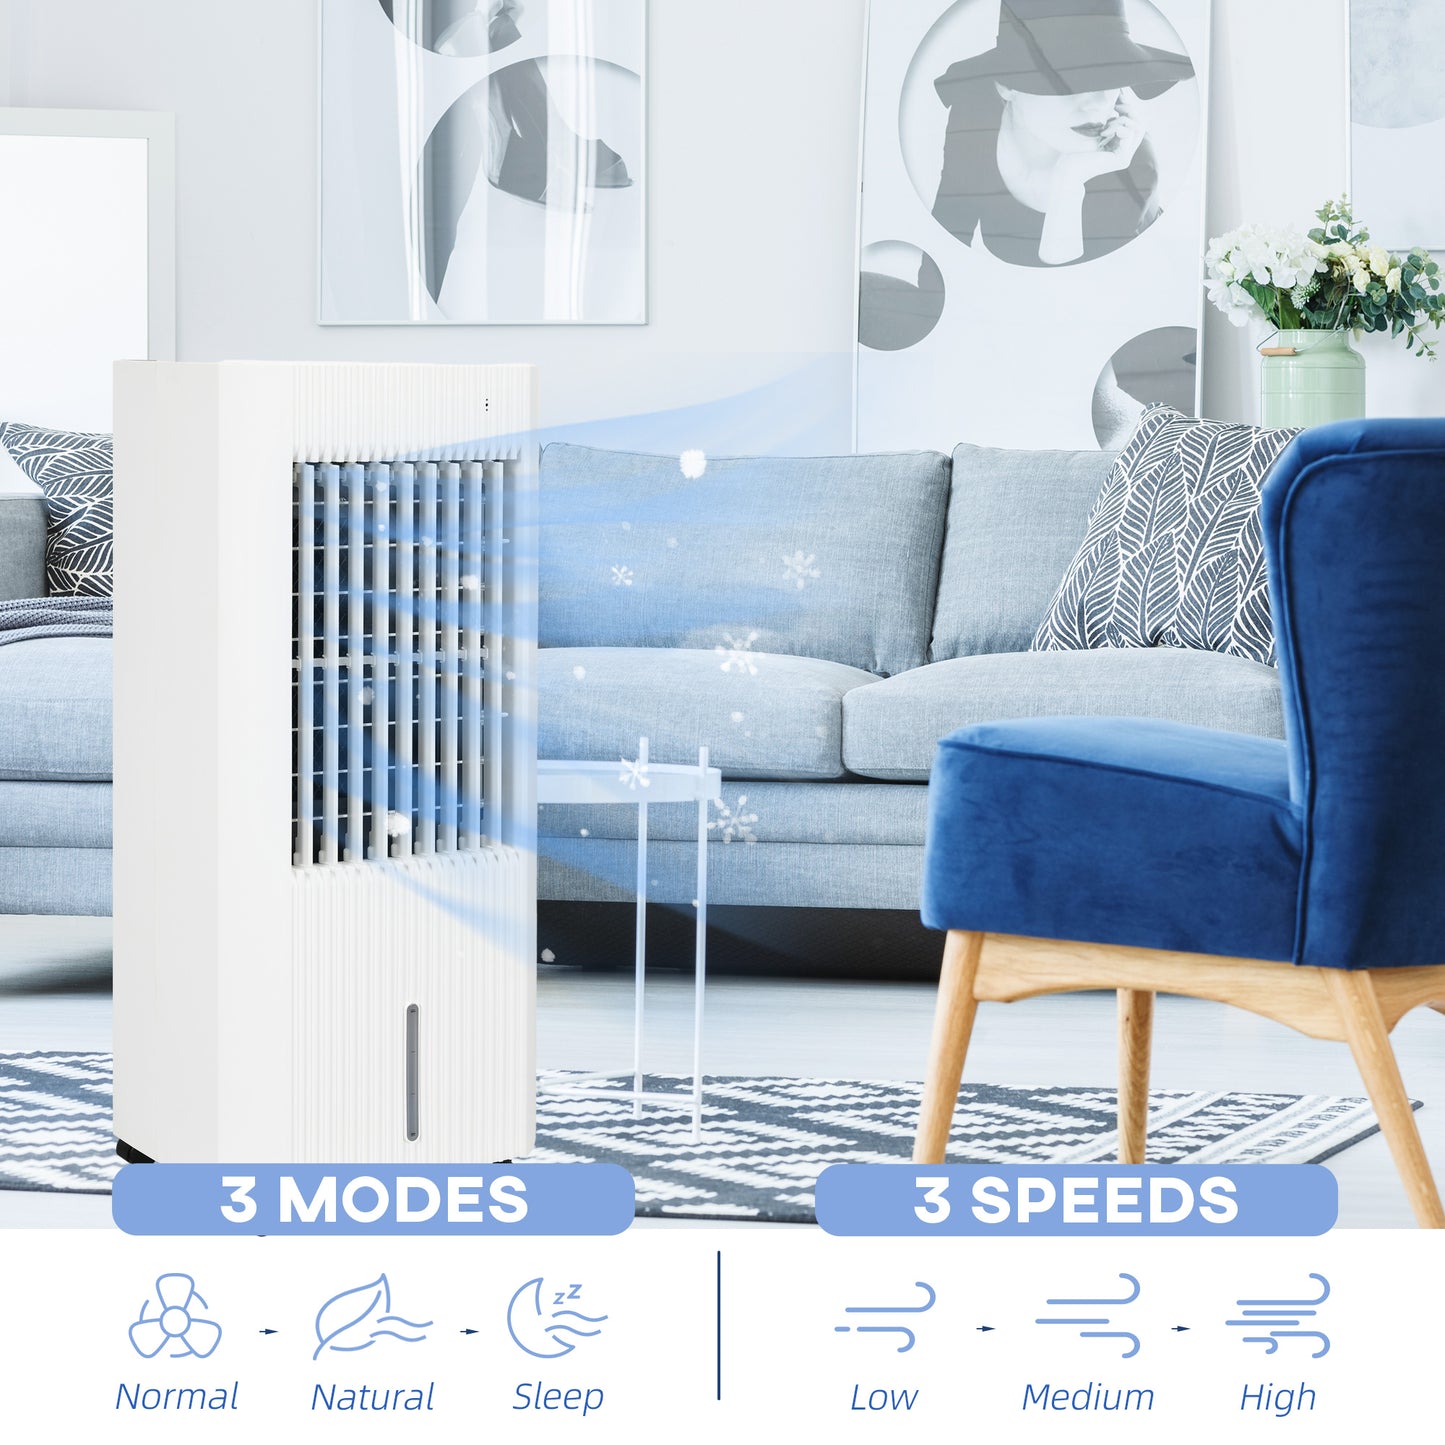 HOMCOM 68cm Portable Evaporative Air Cooler, 3-In-1 Ice Cooling Fan Cooler, Water Conditioner Humidifier Unit with Remote, 15H Timer, Oscillating, LED Display, 5L Water Tank for Home, White